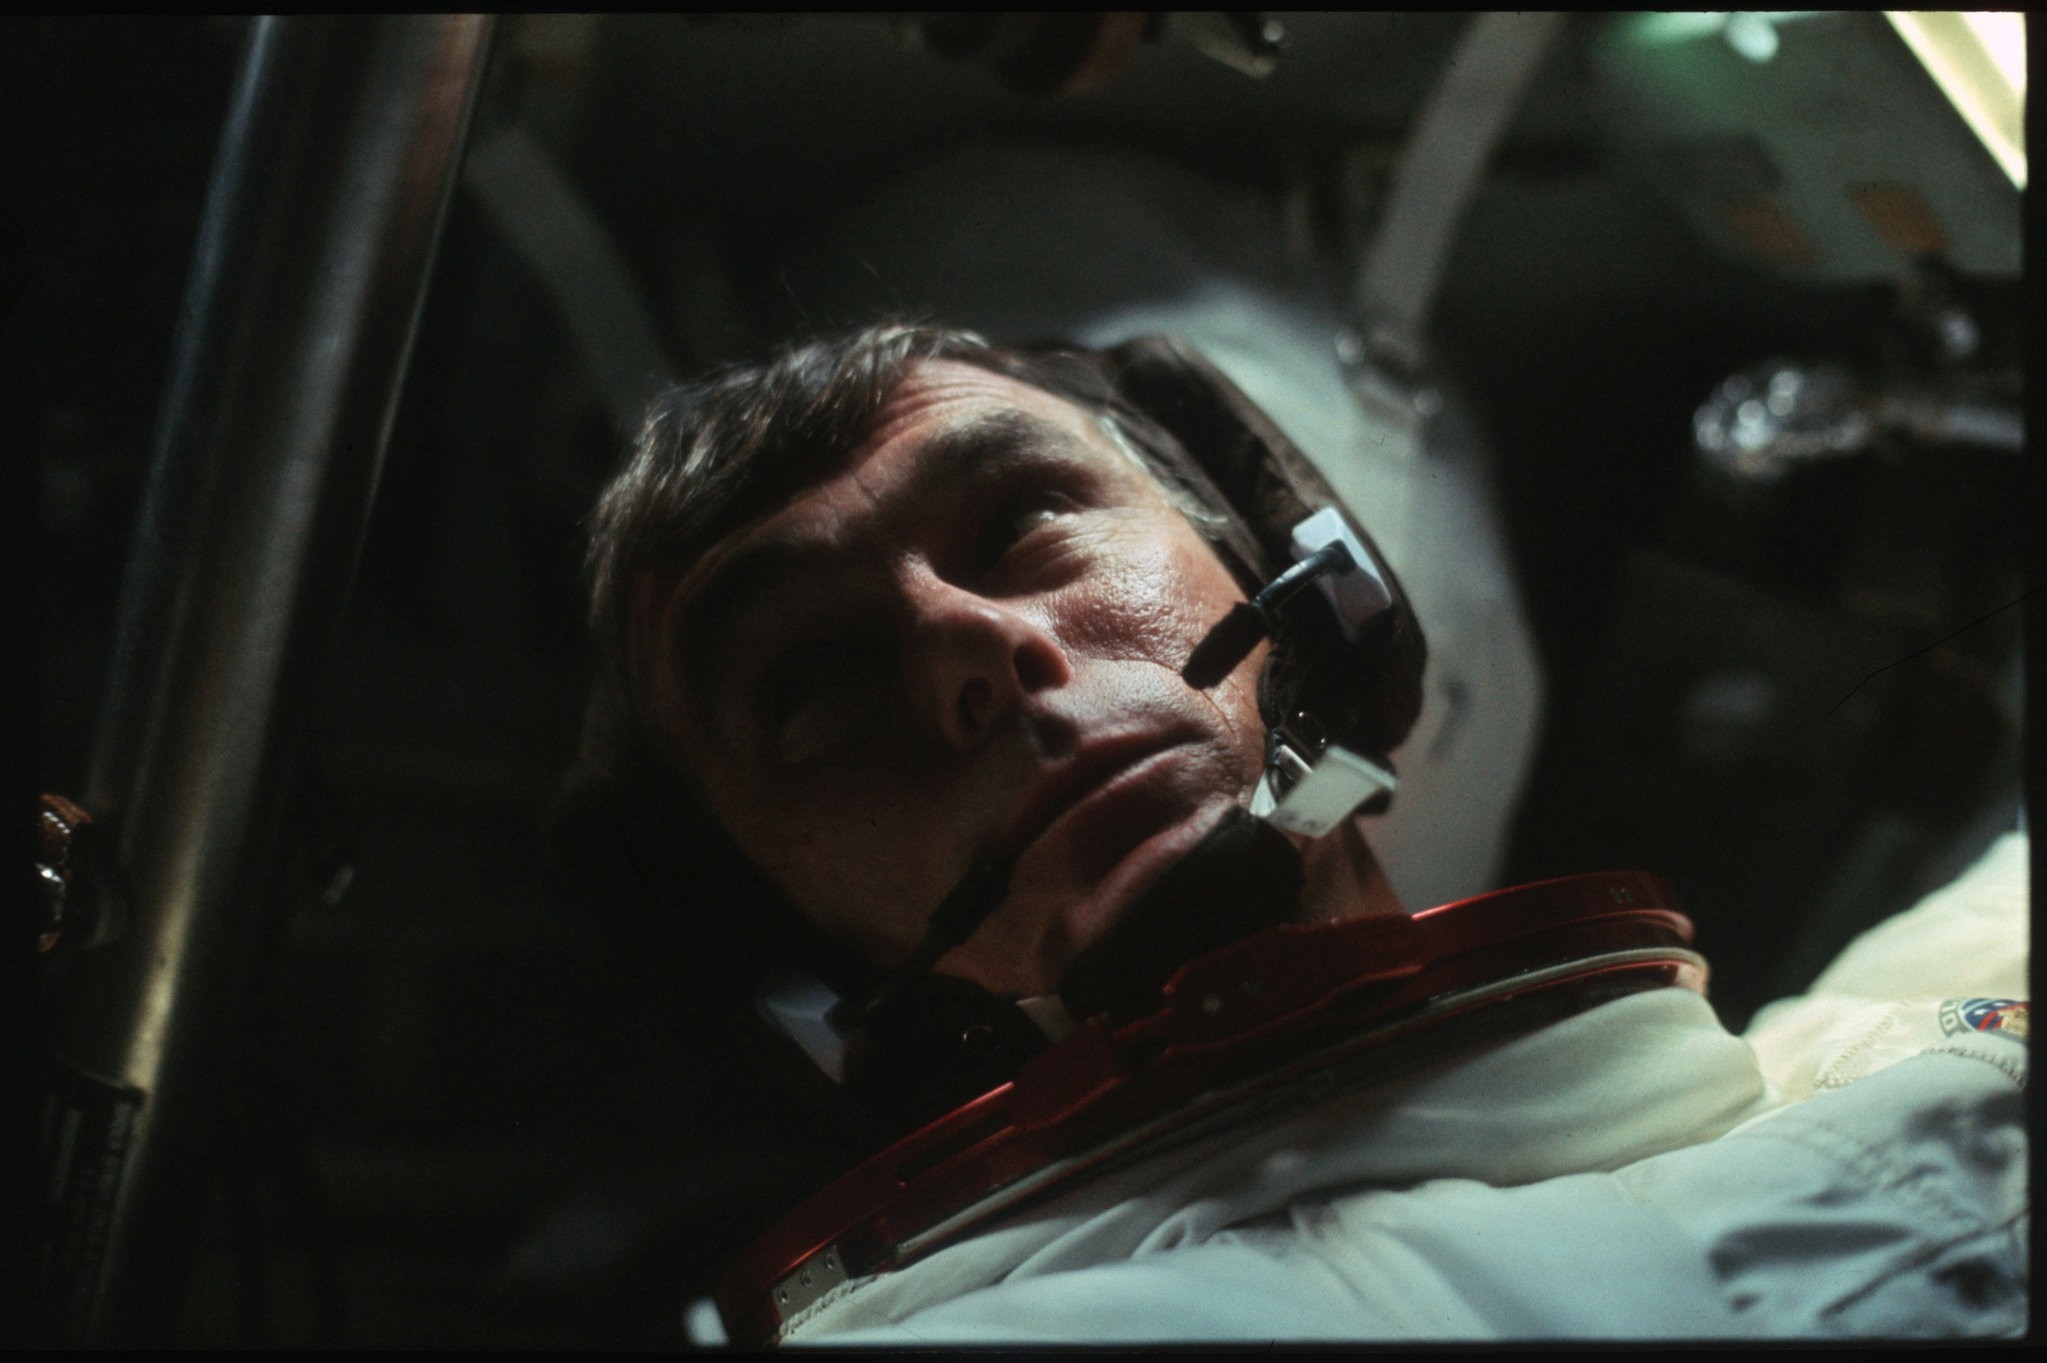 Astronaut Gene Cernan is pictured in the Command Module during the outbound trip from the moon during the Apollo 17 mission in this December, 1972 NASA handout photo. (Reuters Photo)